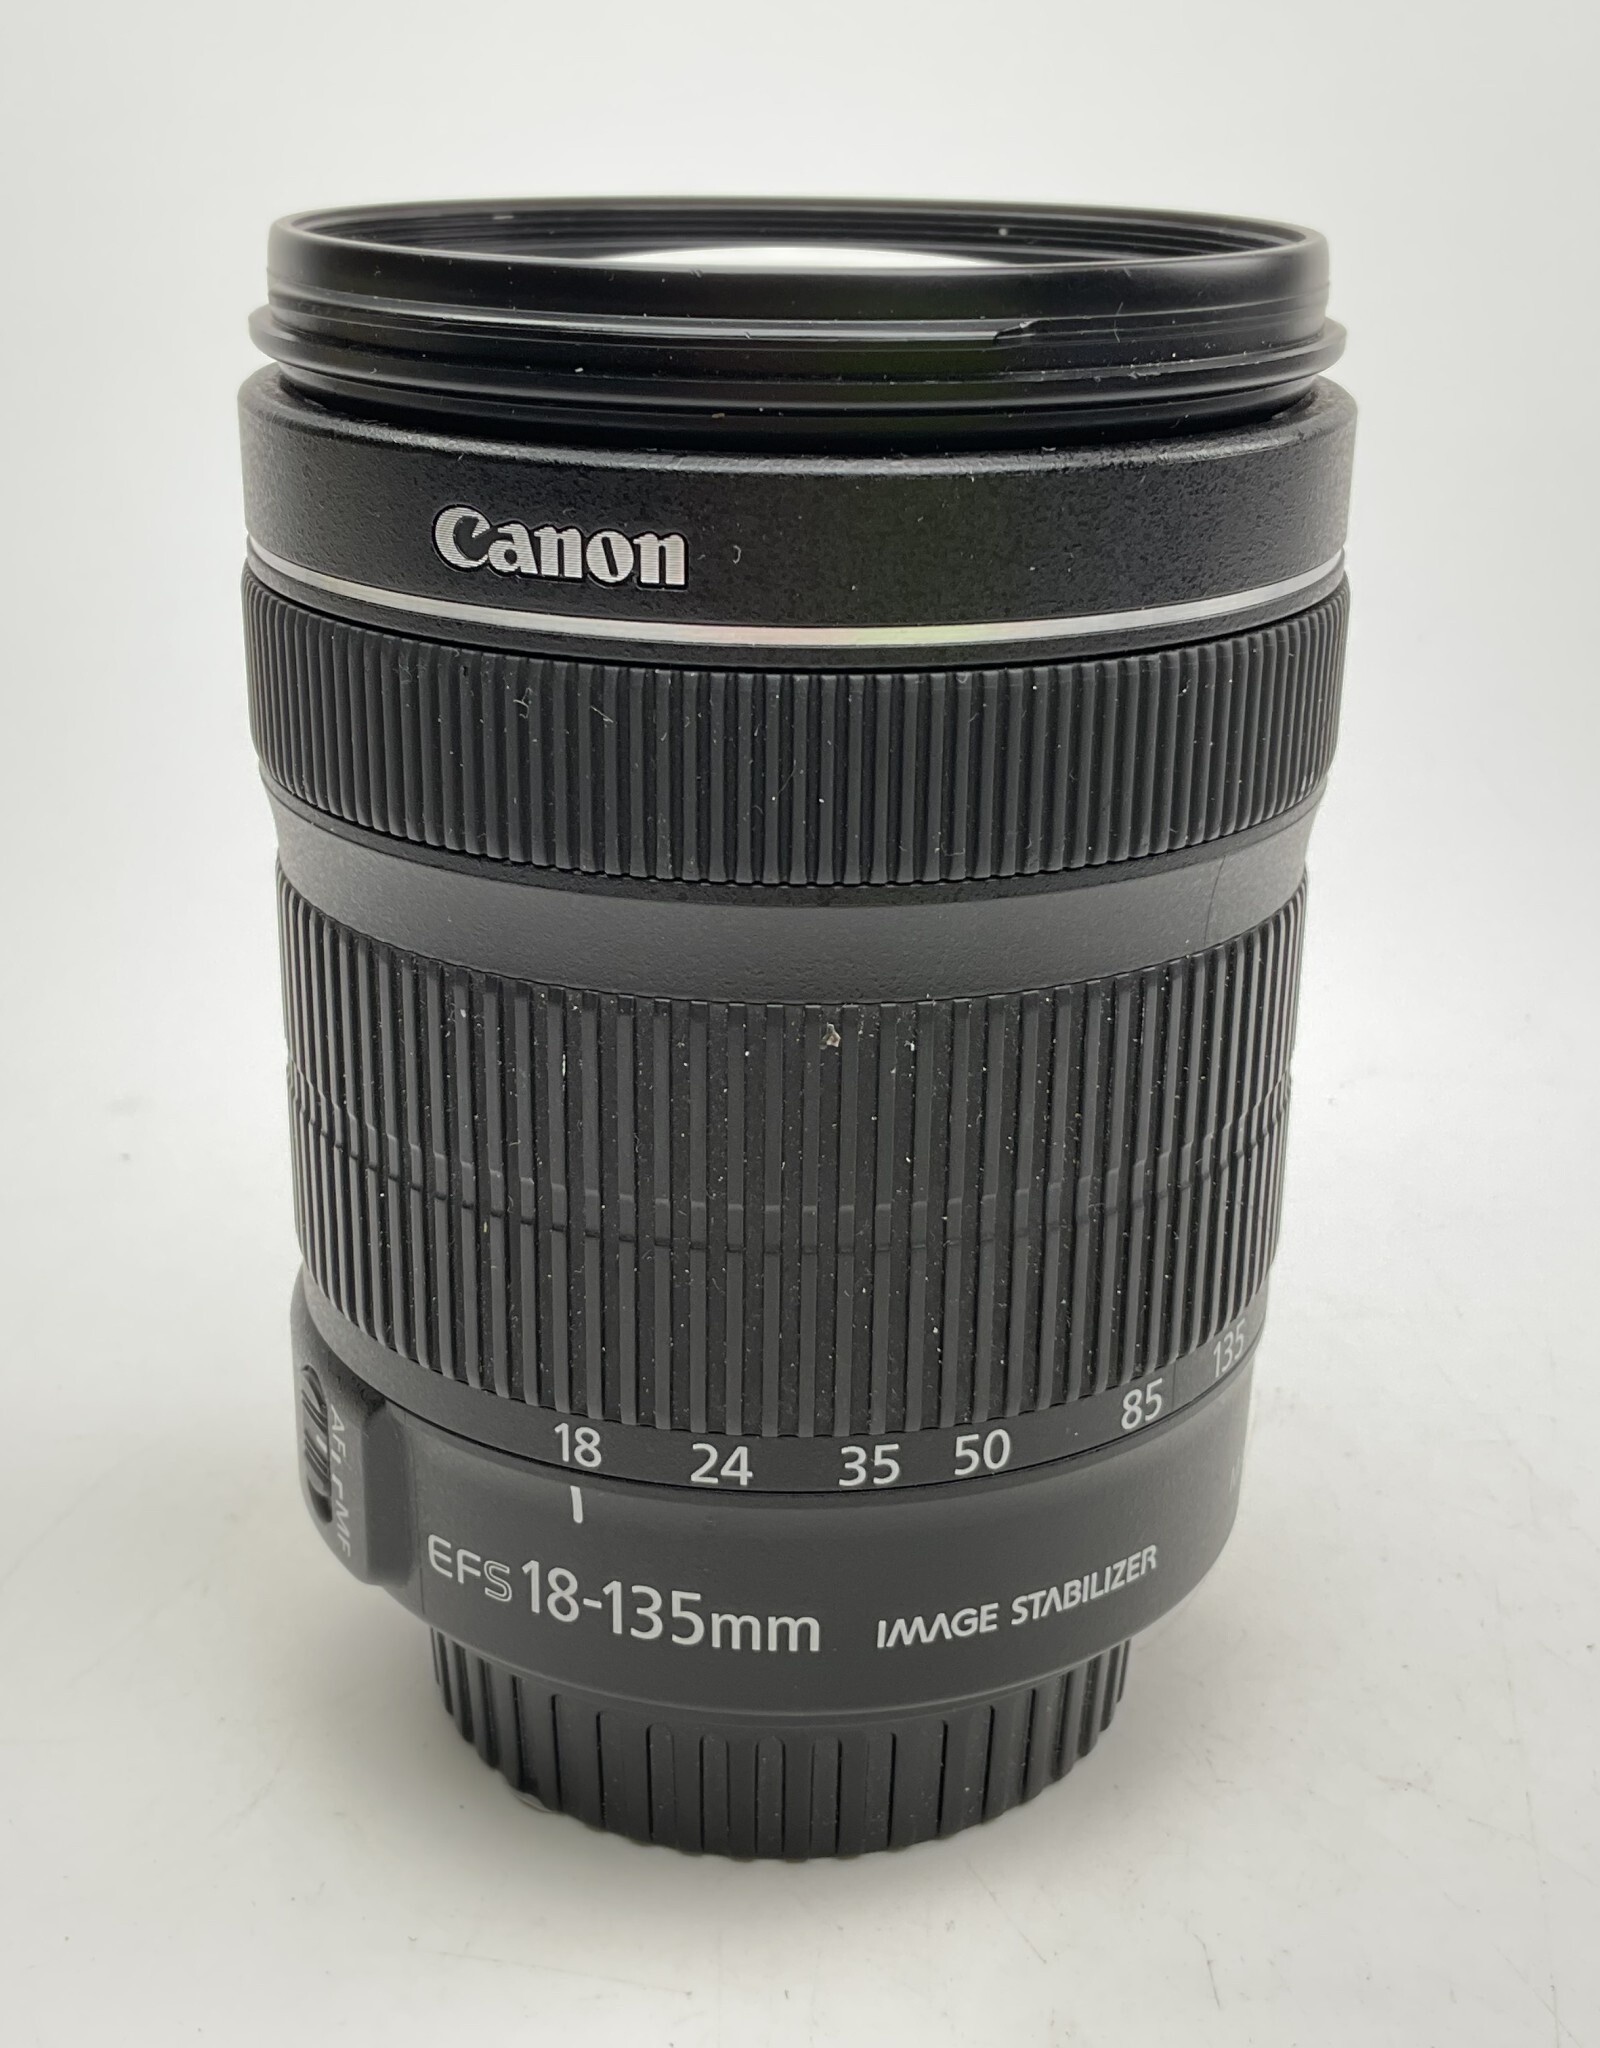 CANON Canon EF-S 18-135mm f3.5-5.6 IS STM Lens Used Good